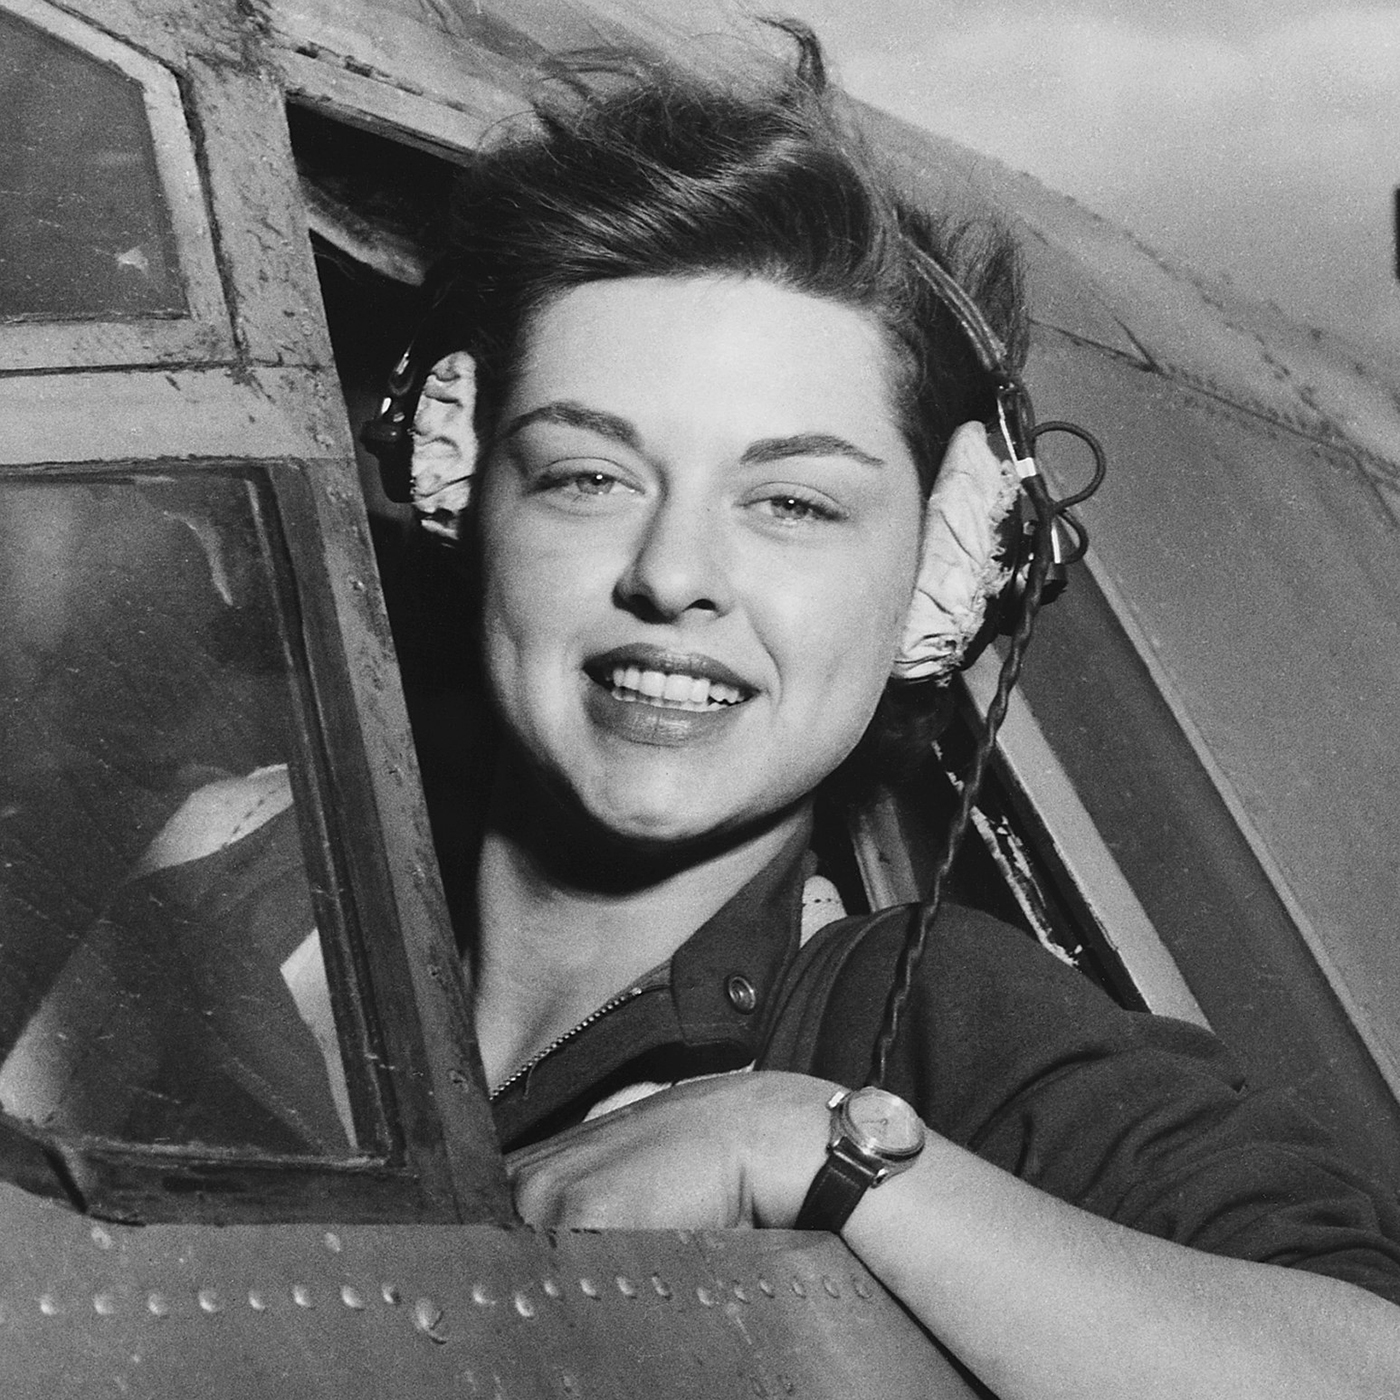 Meet the Women Airforce Service Pilots...the WASPs